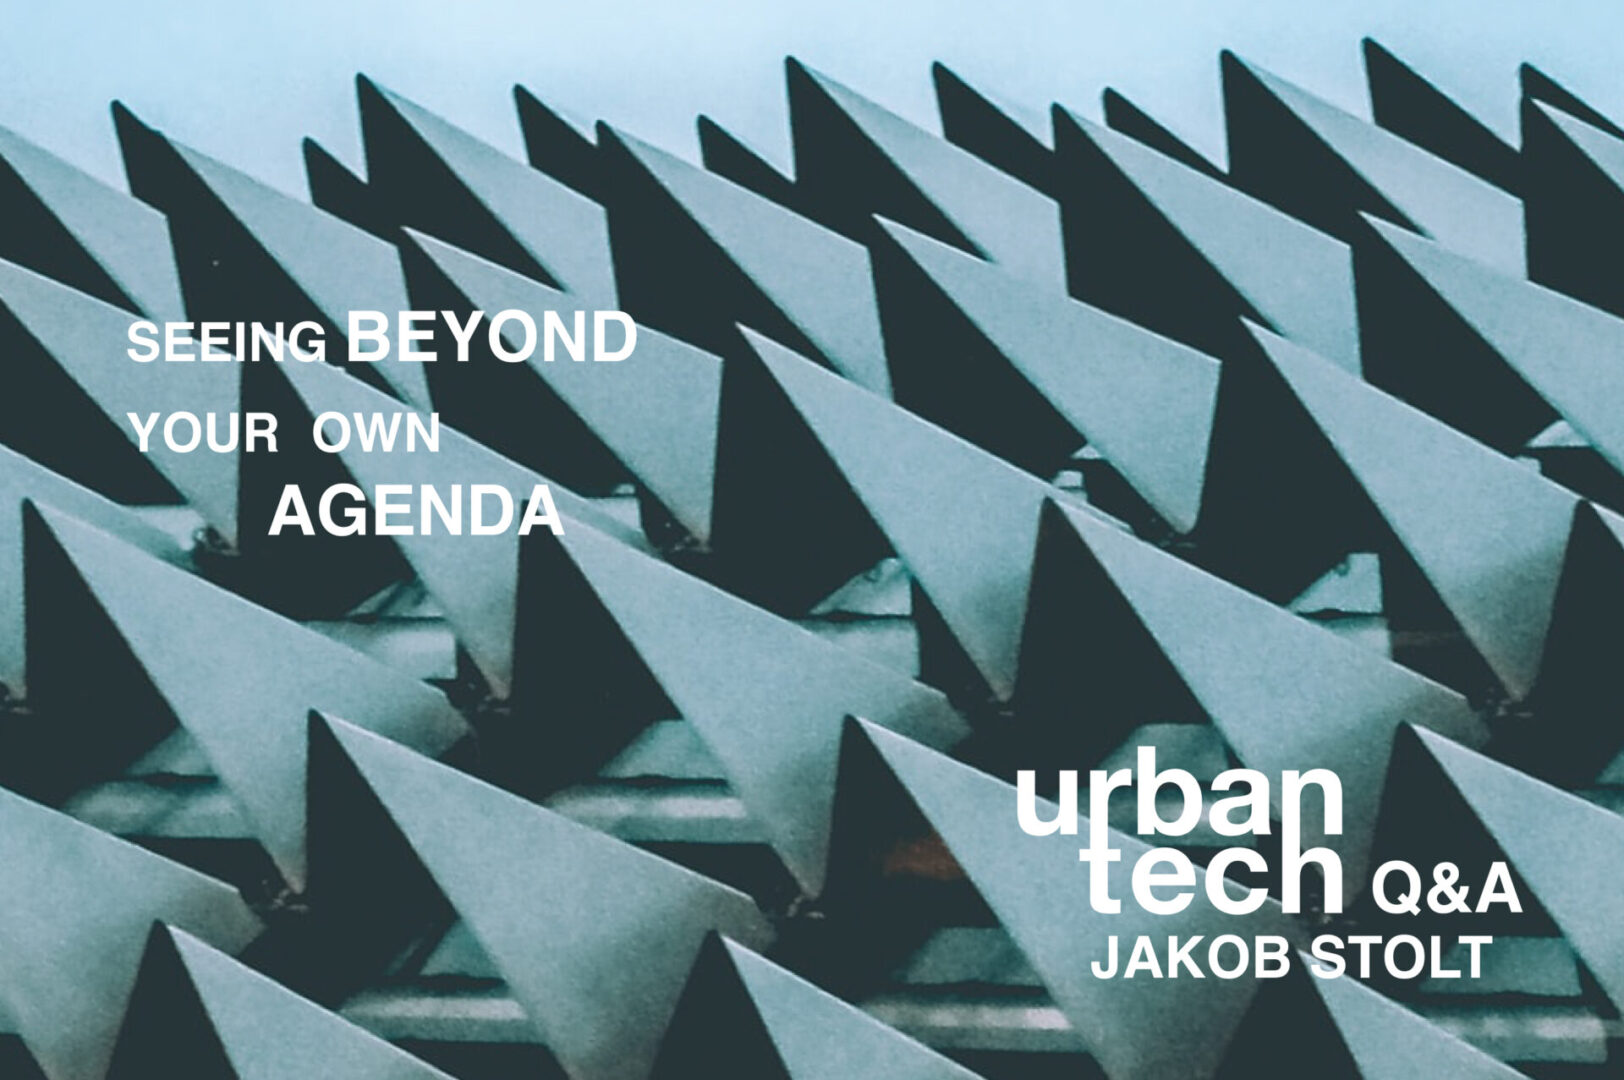 seeing beyond your own agenda - urbantech q&a with Jakob stolt